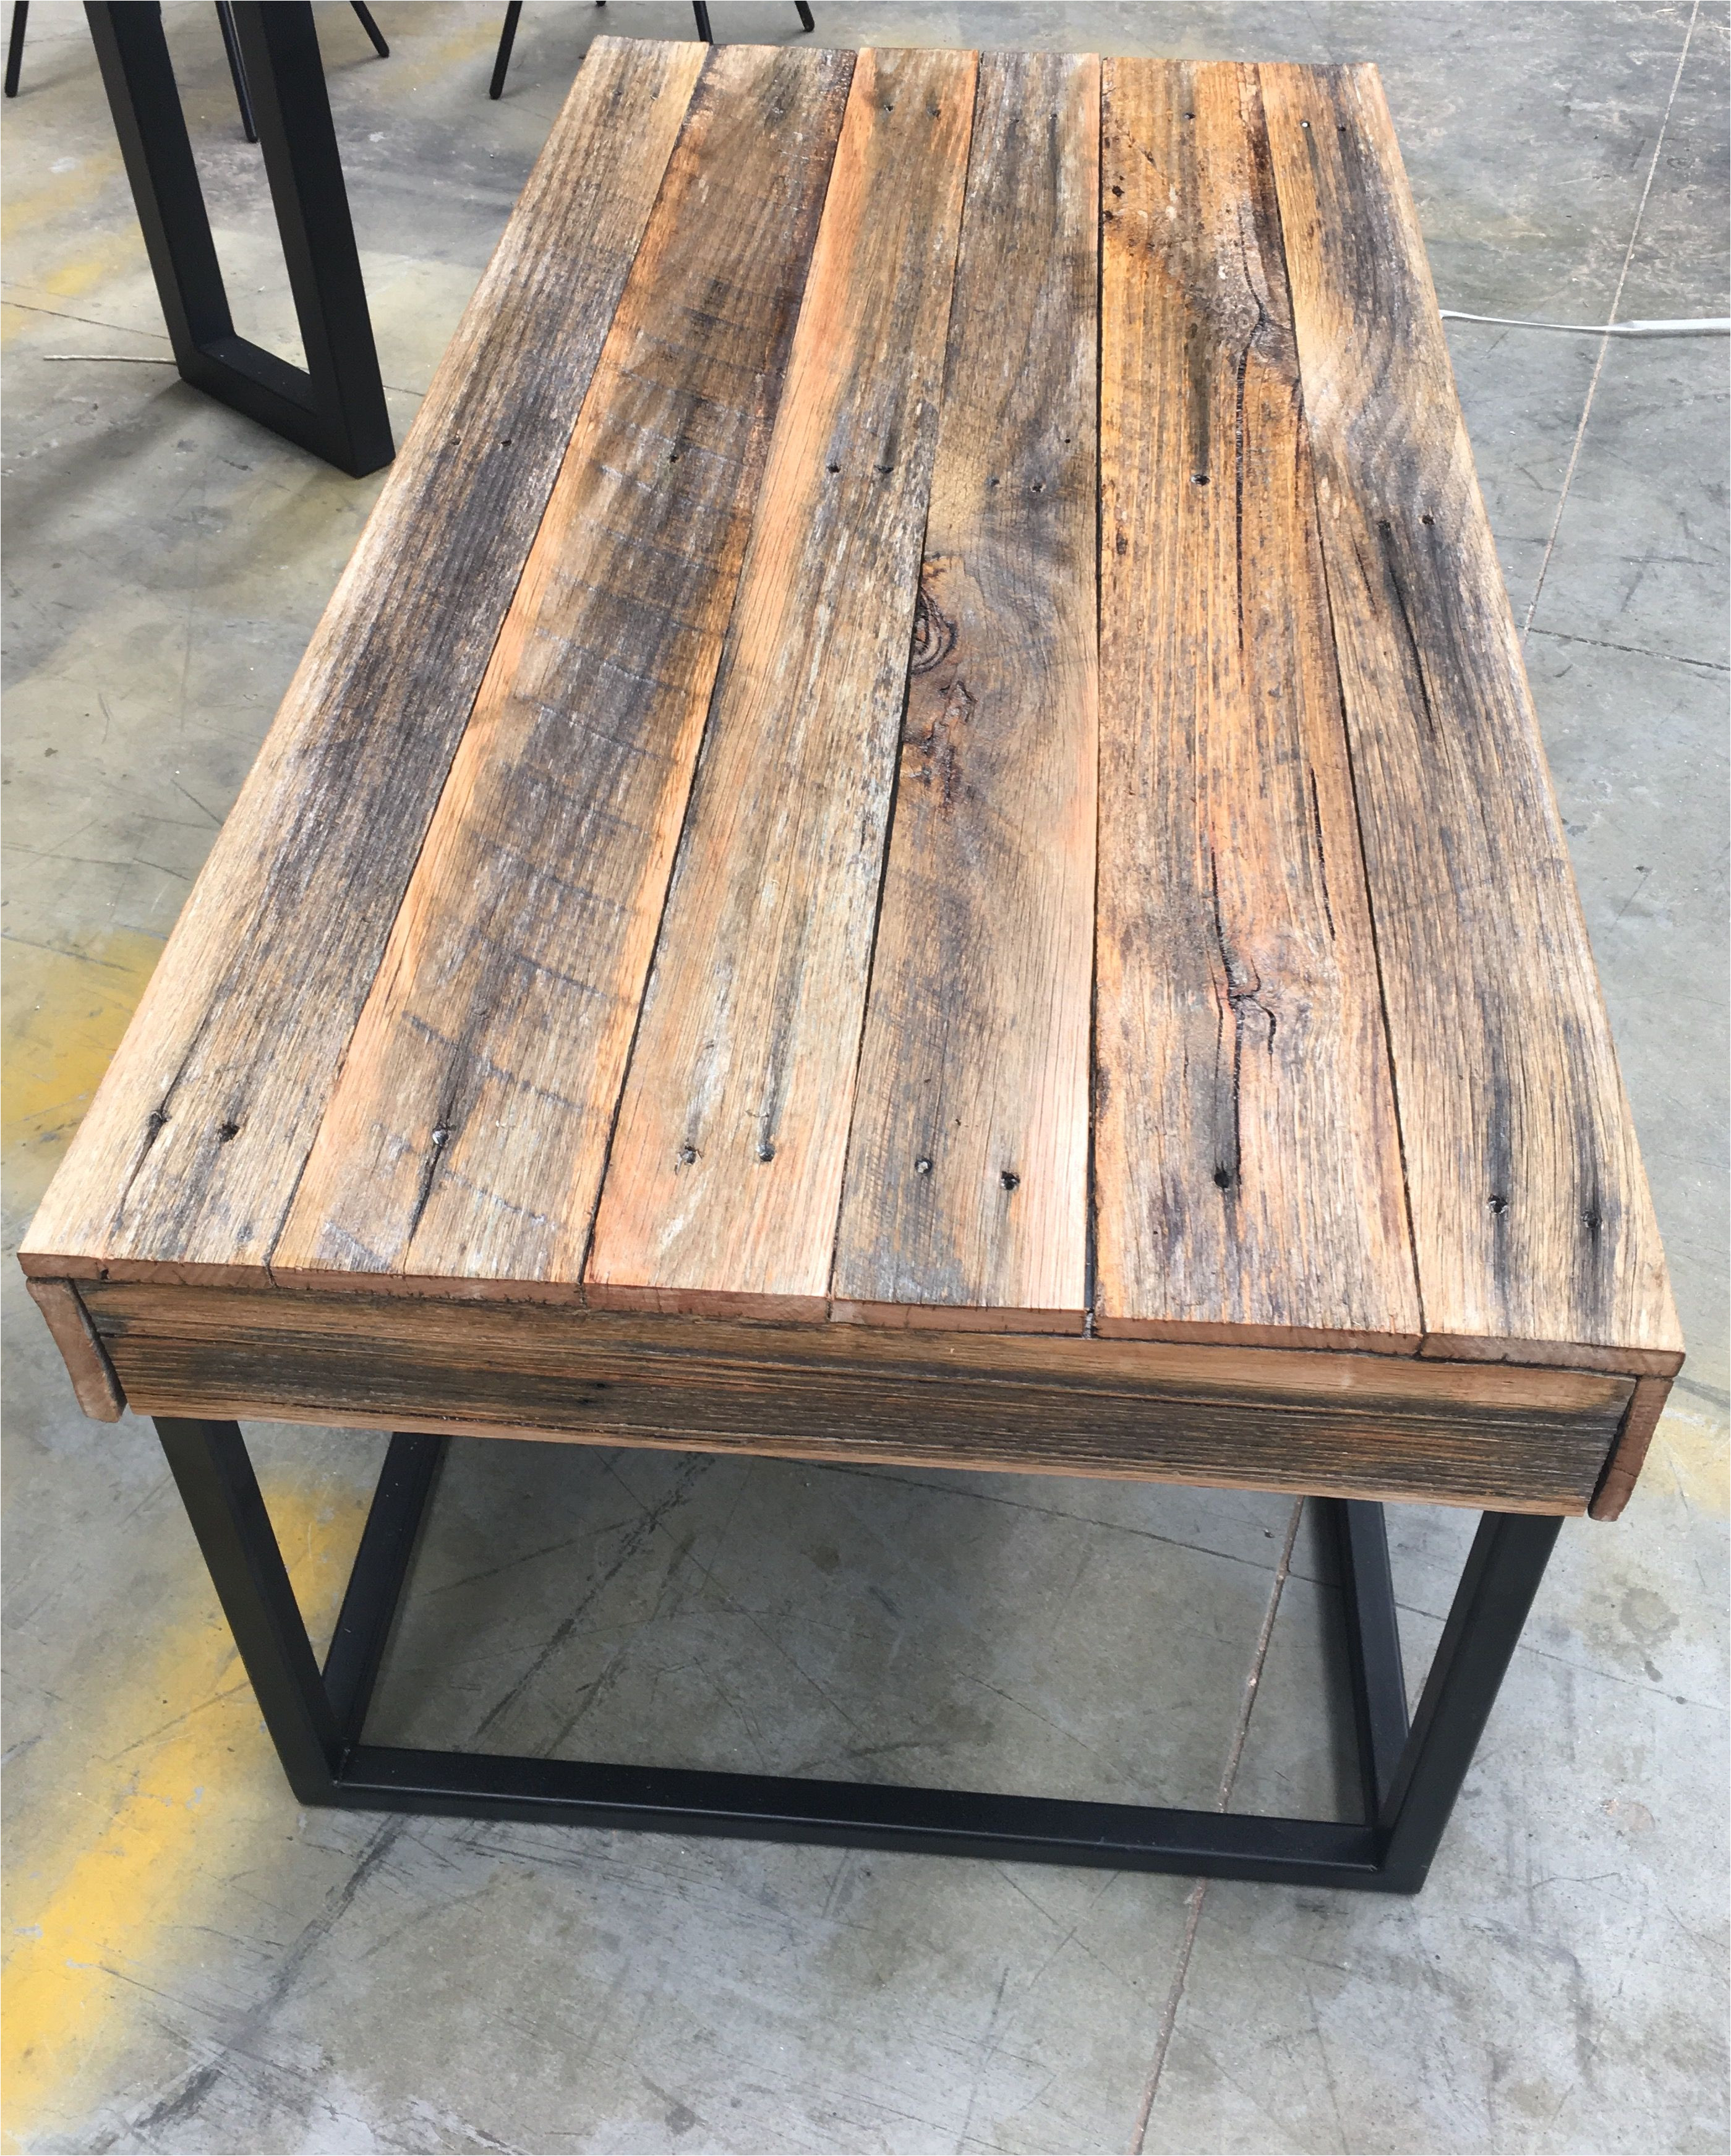 recycled timber palings industrial coffee table made by recycledtimberfurnitureoz com